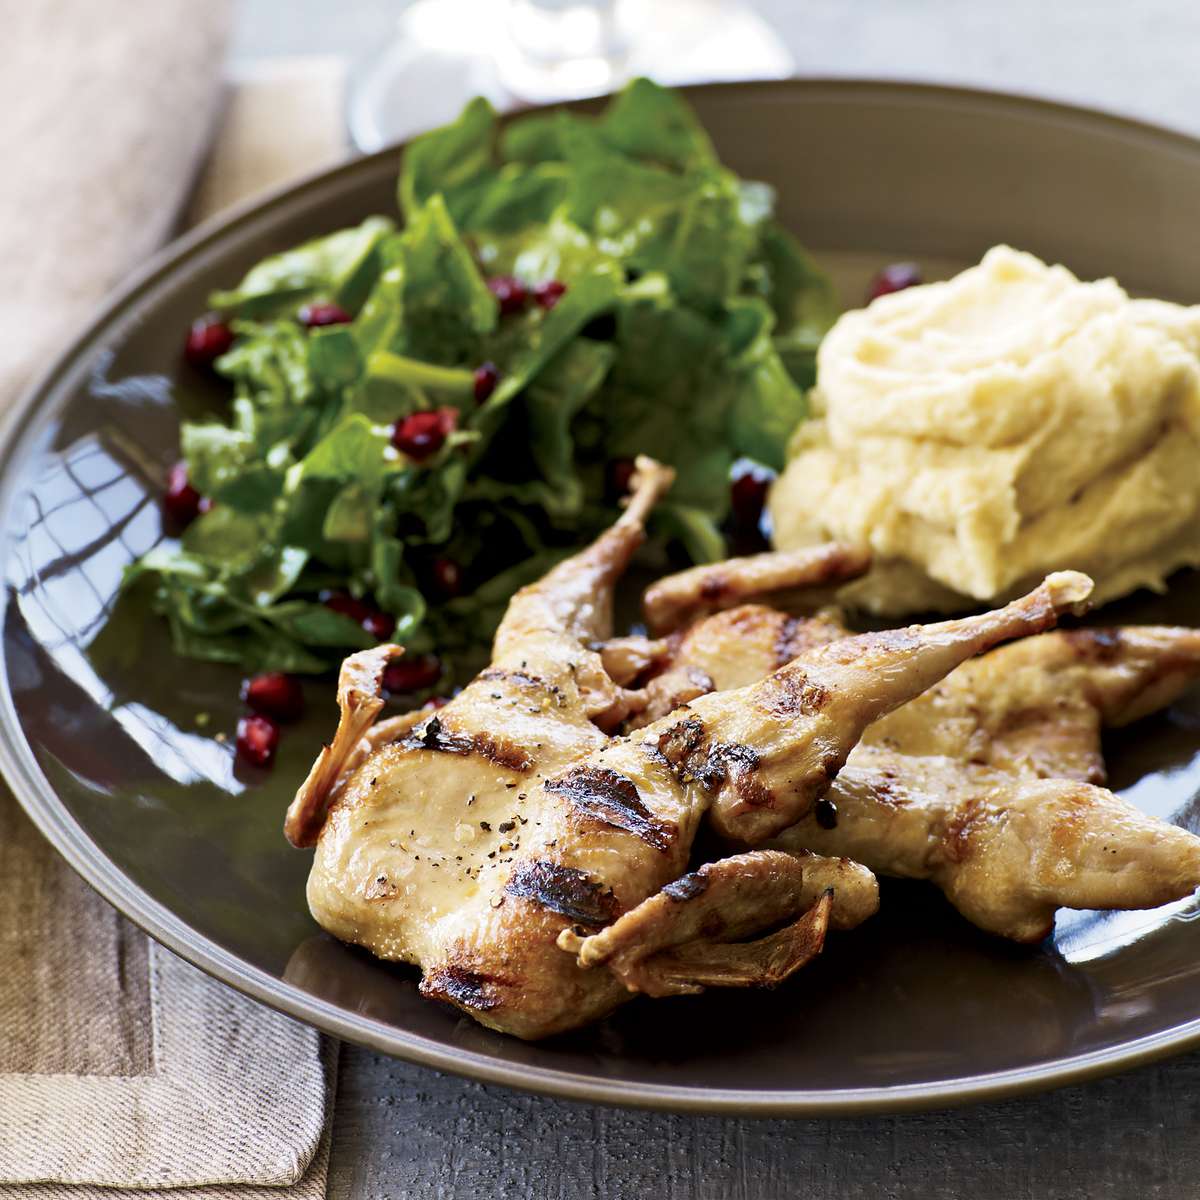 Grilled Quail with Spinach-Pomegranate Salad 